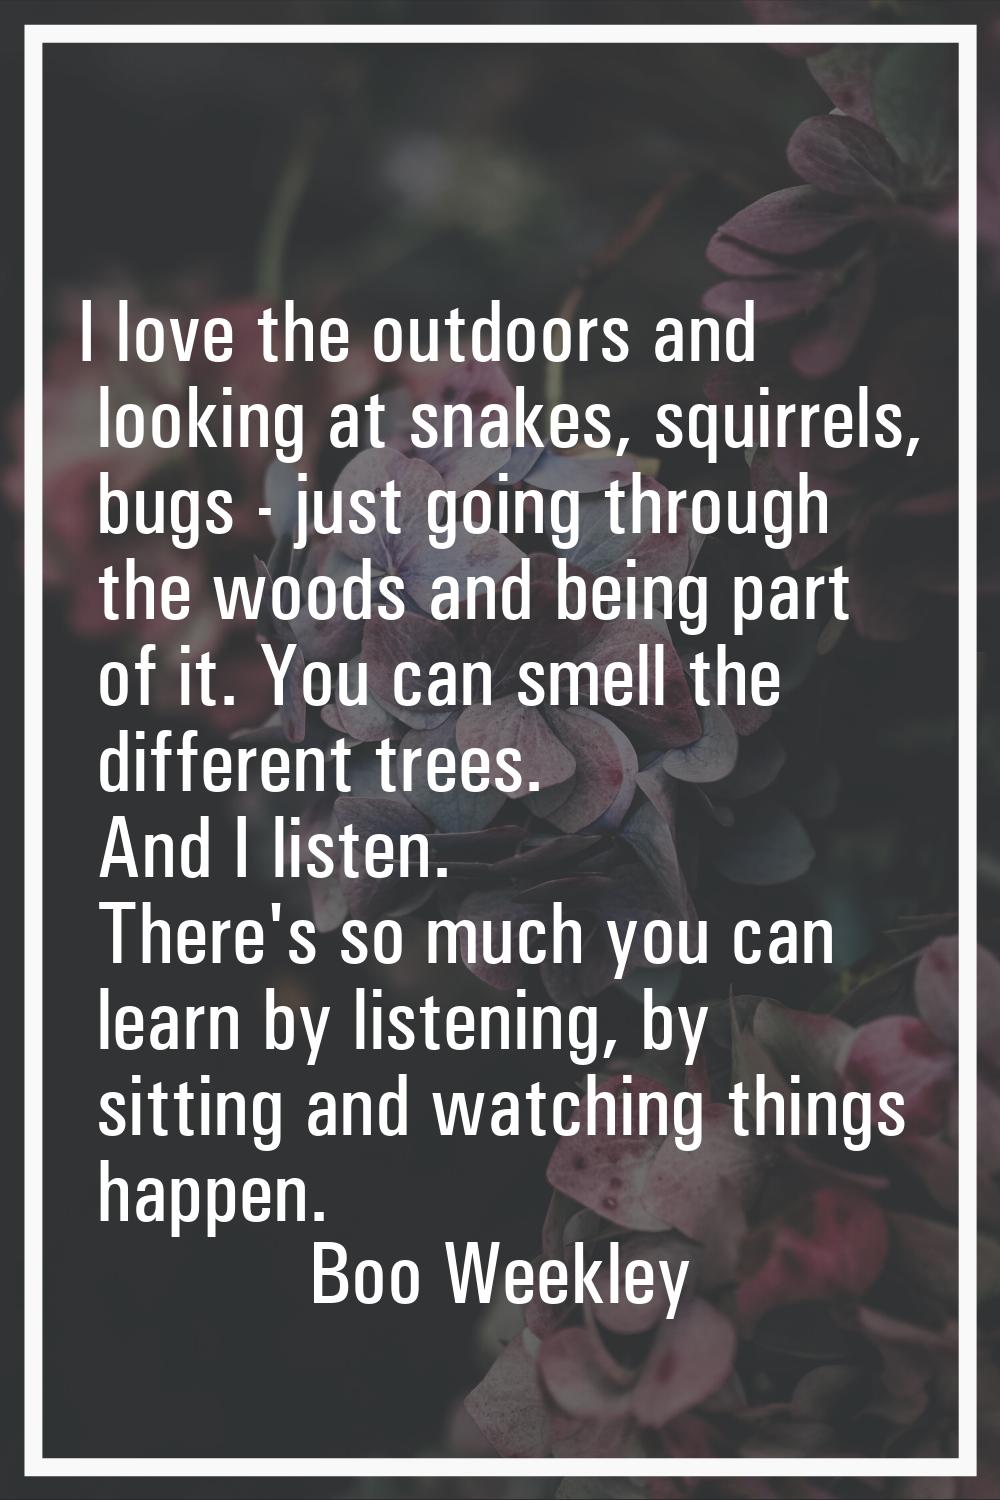 I love the outdoors and looking at snakes, squirrels, bugs - just going through the woods and being